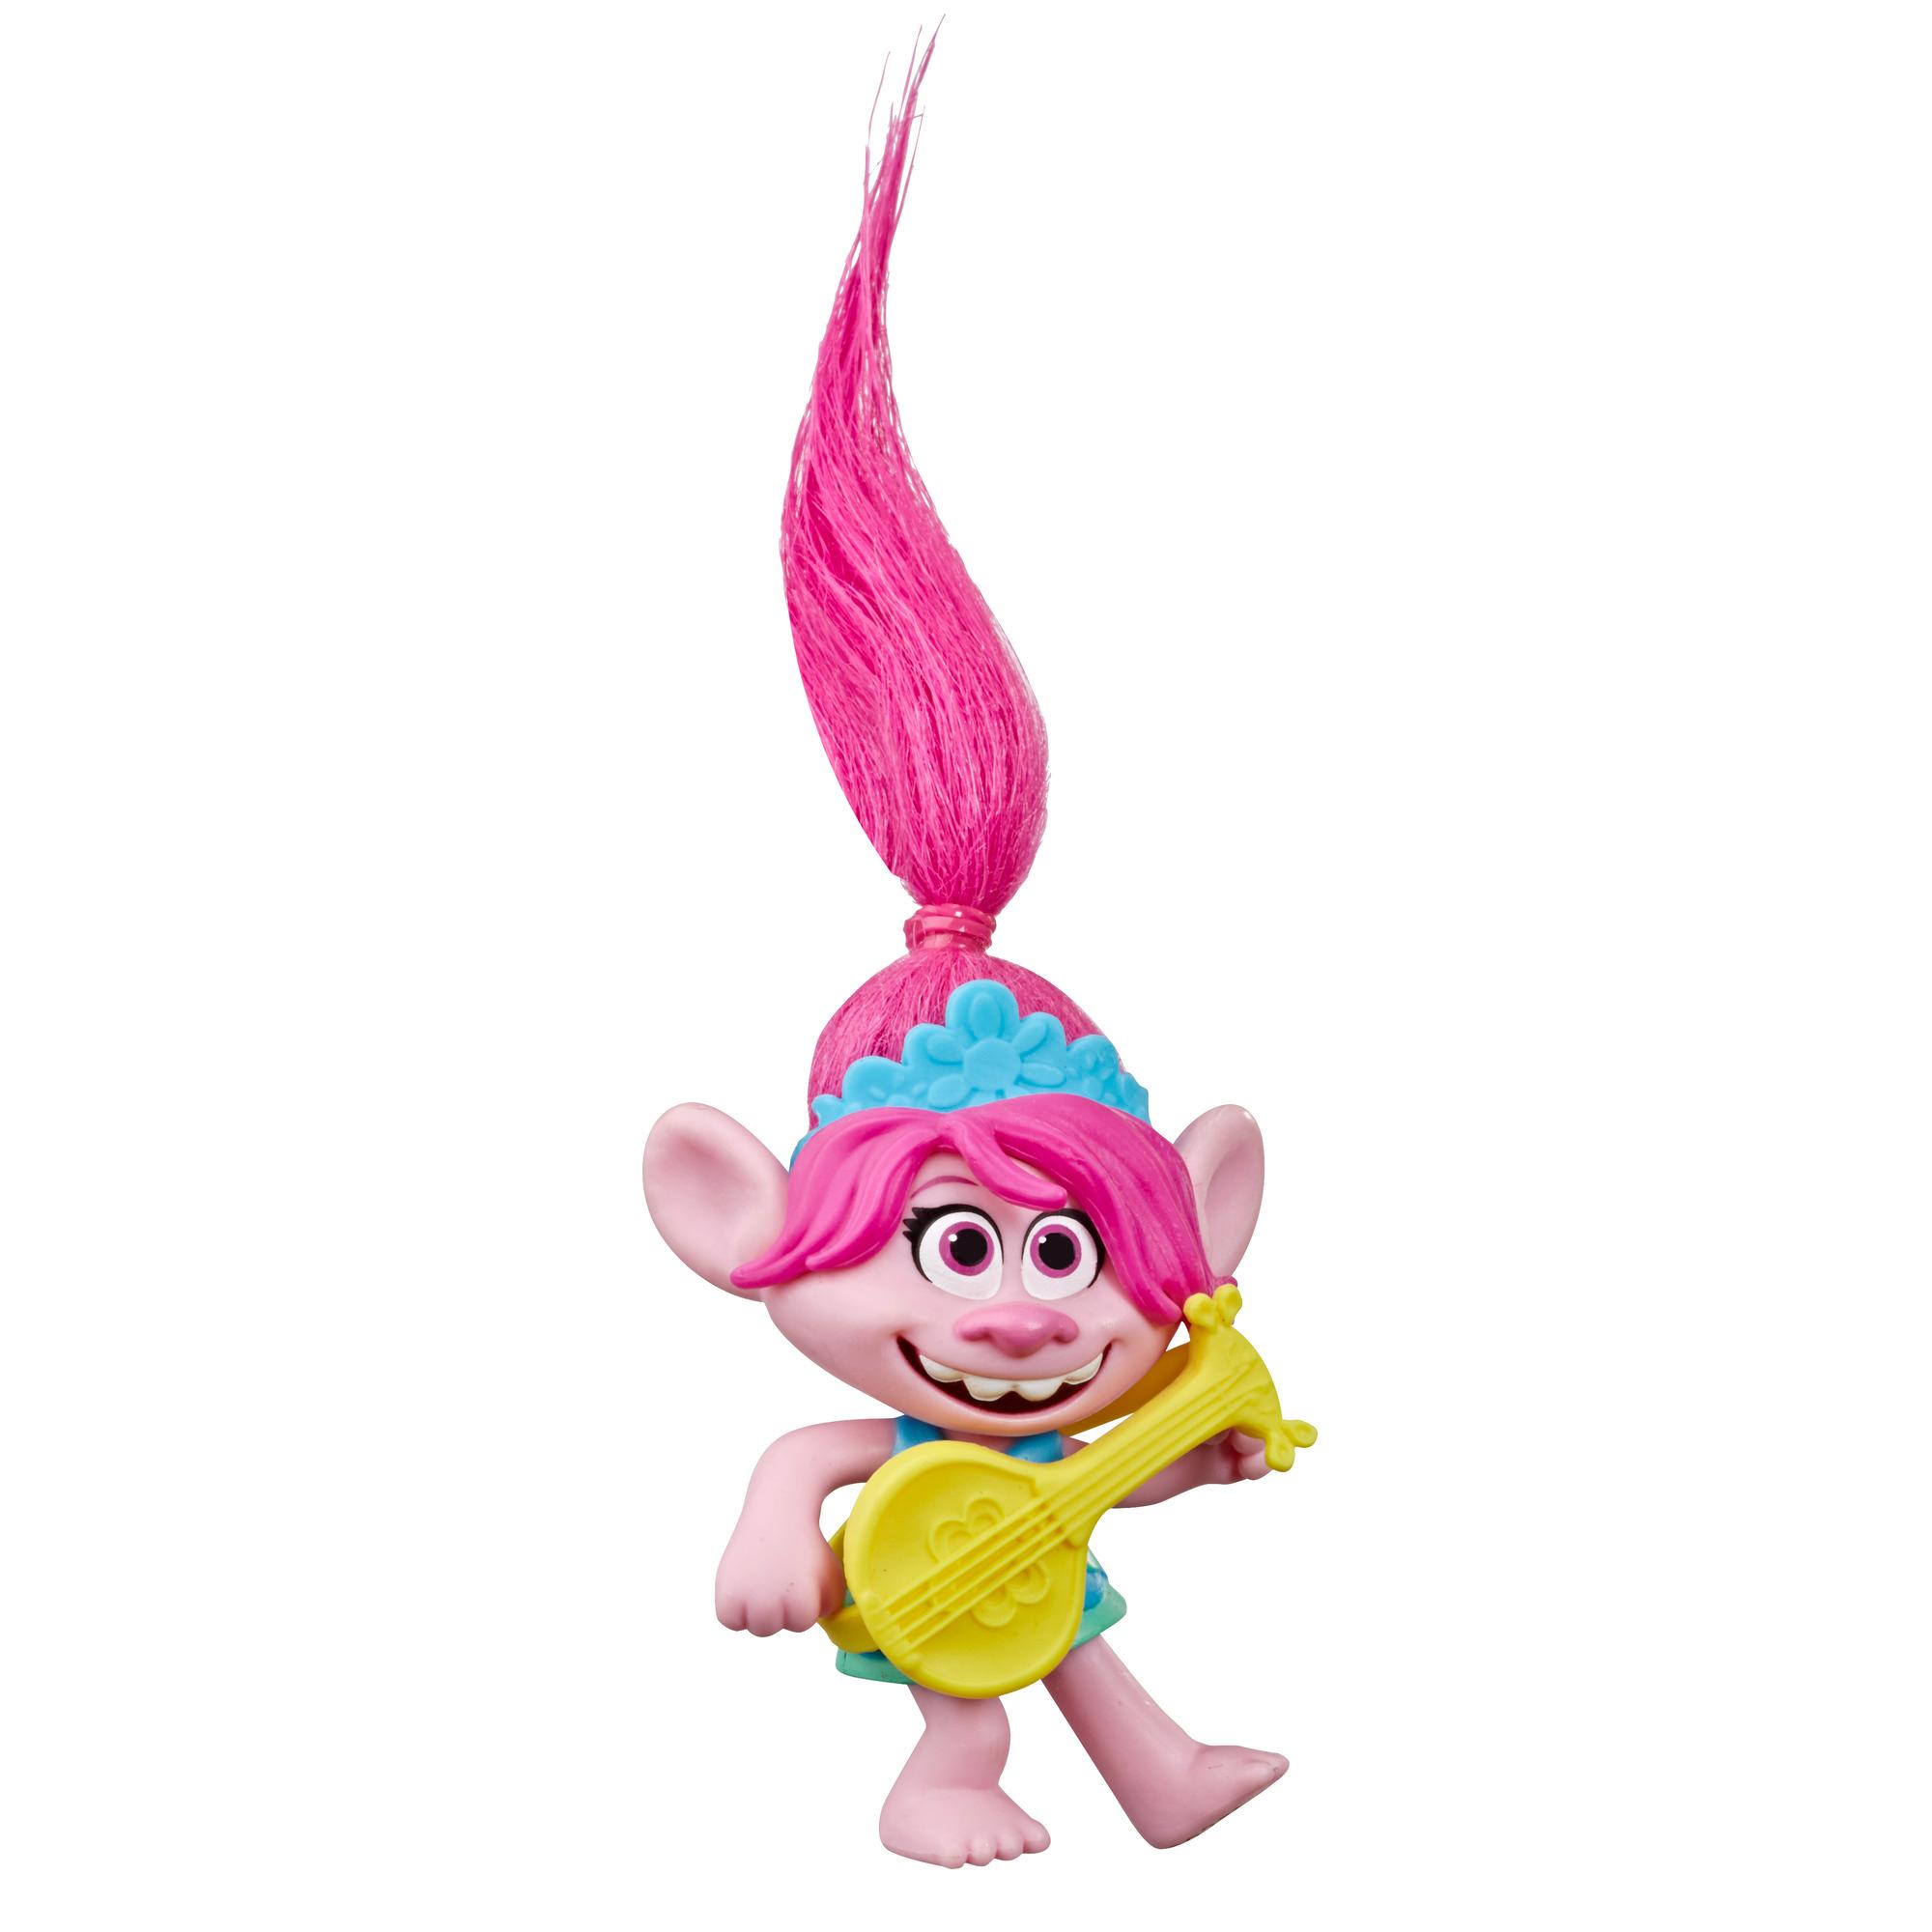 DreamWorks Trolls World Tour Poppy, Doll Figure with Ukulele Accessory, Toy Inspired by the Movie Trolls World Tour